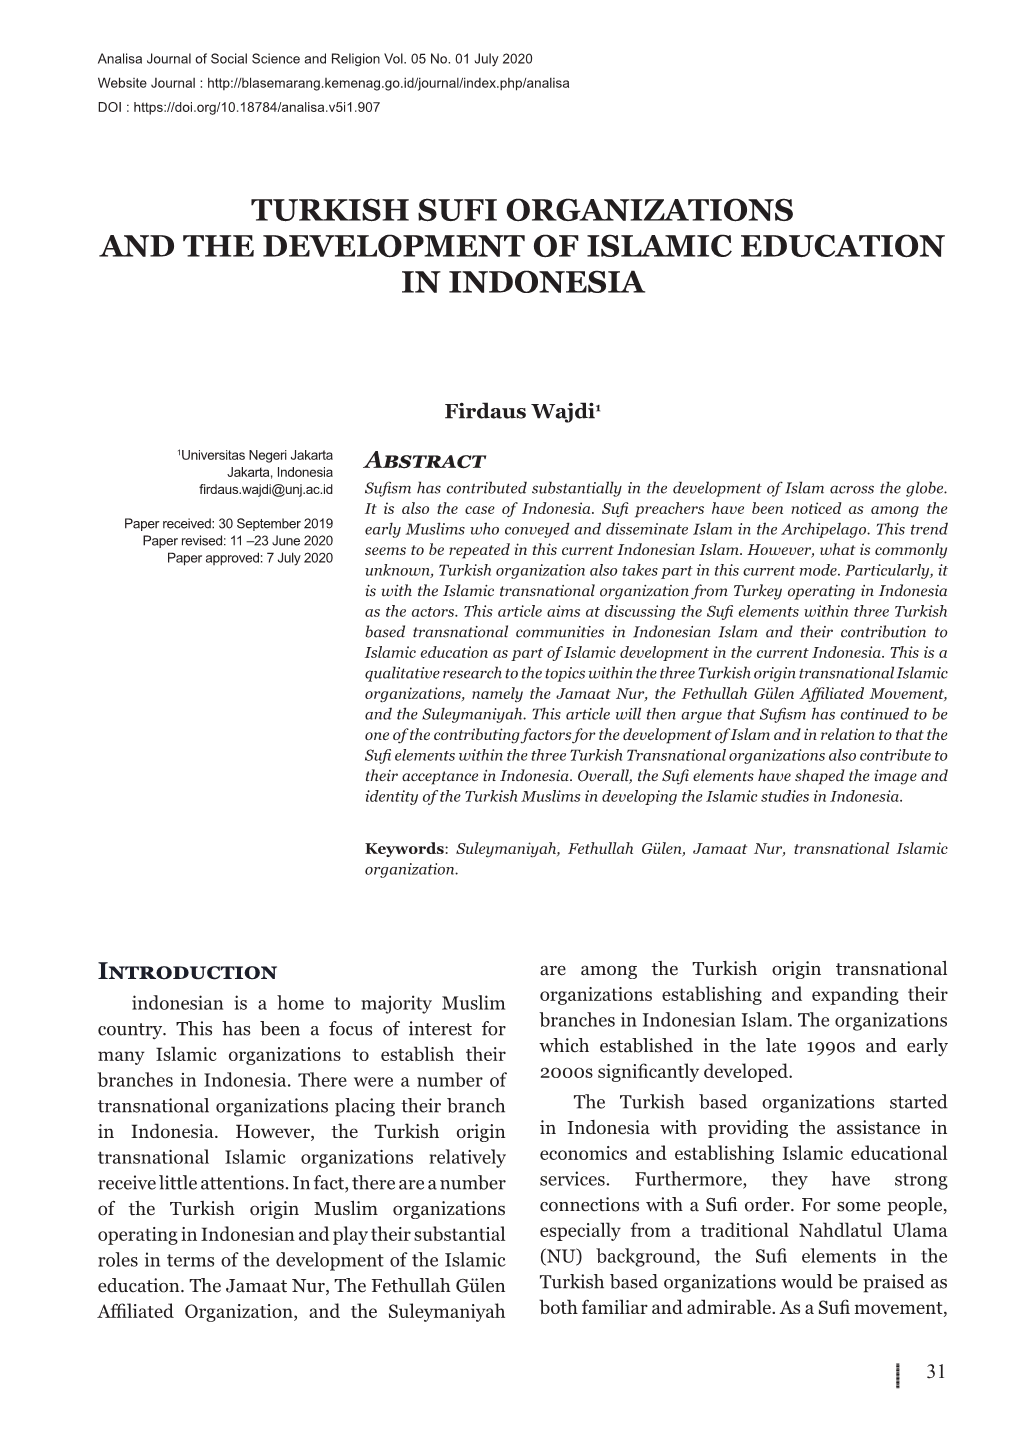 Turkish Sufi Organizations and the Development of Islamic Education in Indonesia